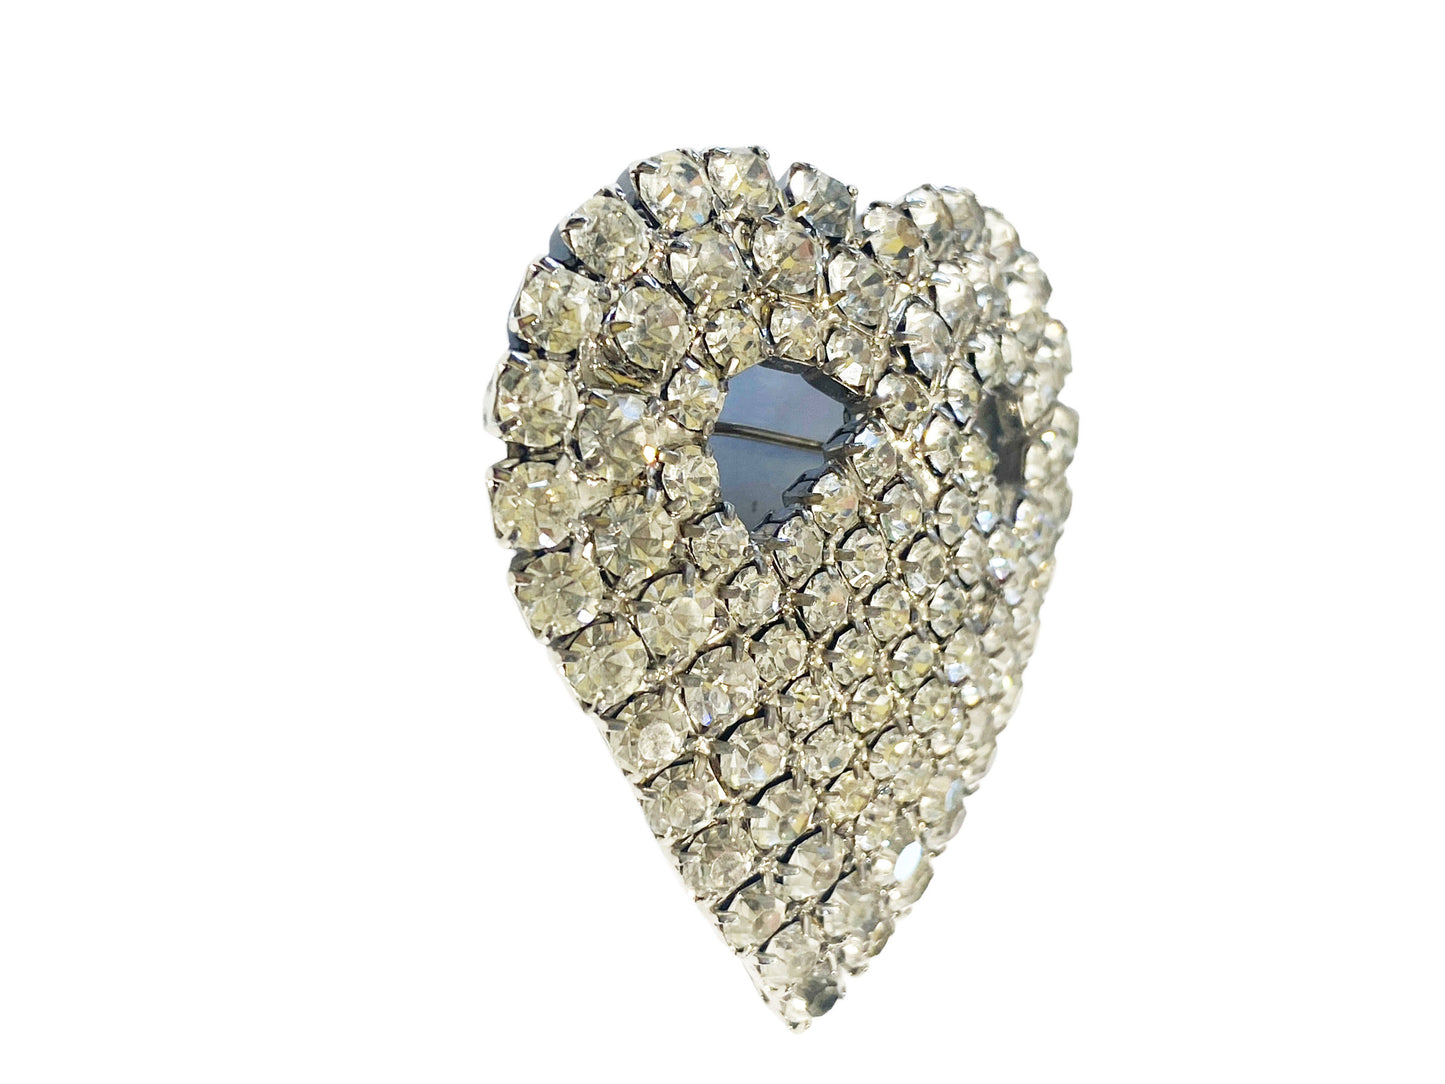 #7145 Vintage Clear Rhinestone Heart Brooch Pin Costume Jewelry Silver Toned